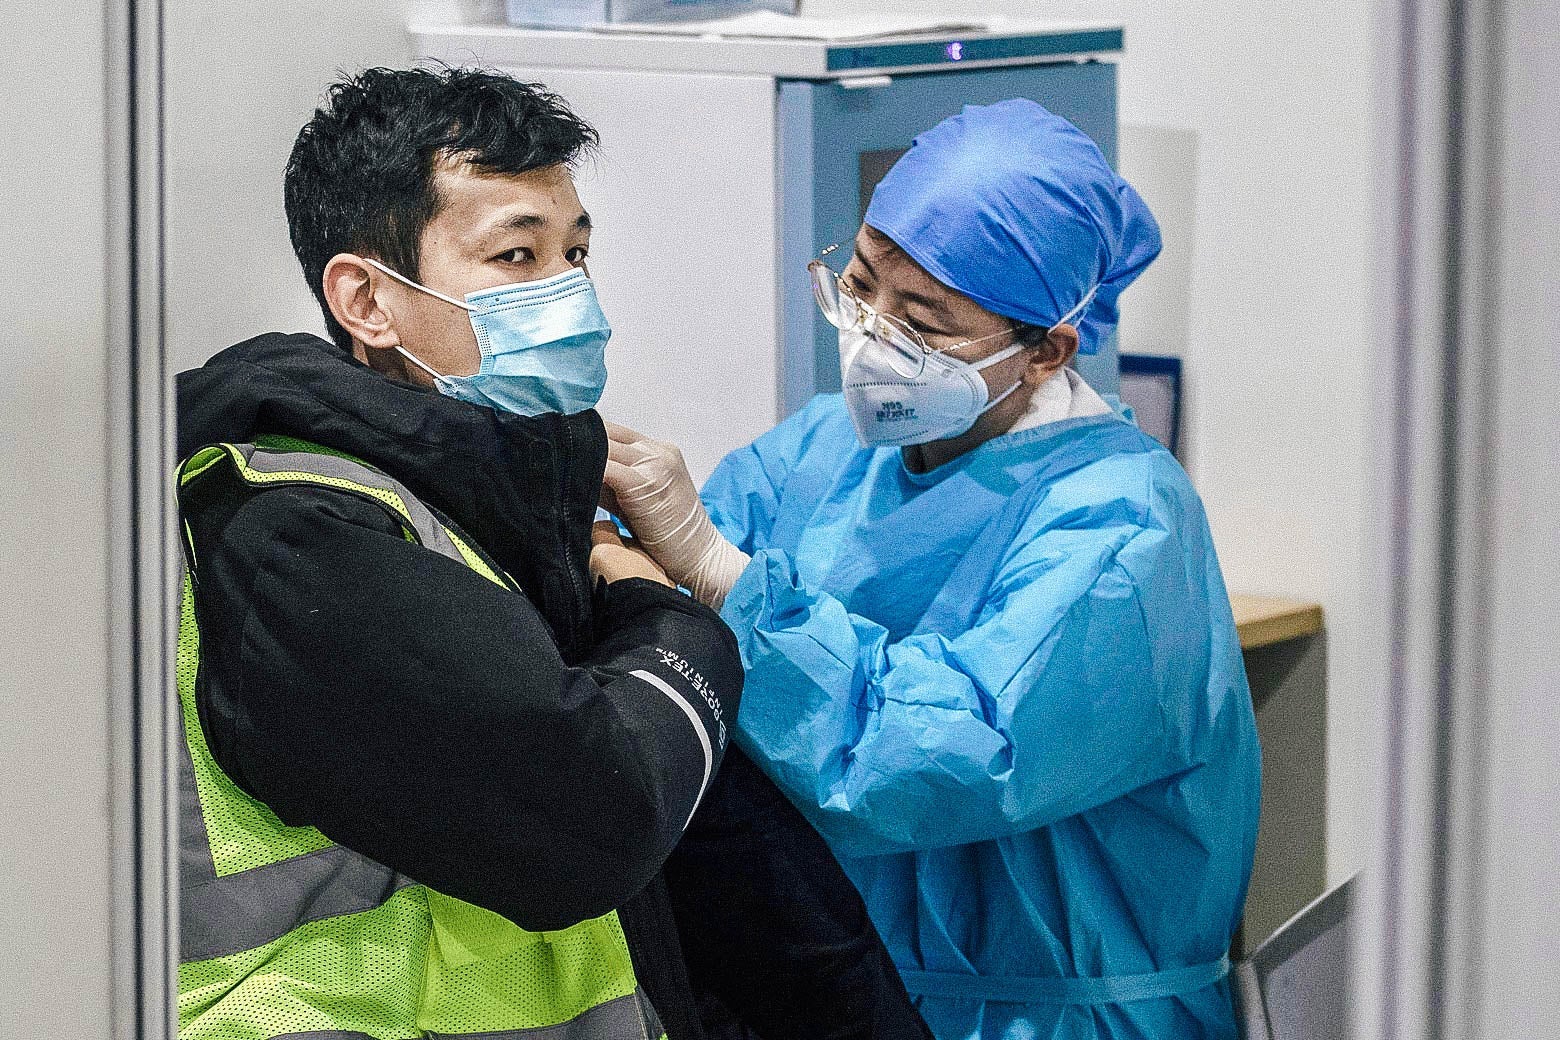 A person in protective gear gives a man in a mask a vaccine.